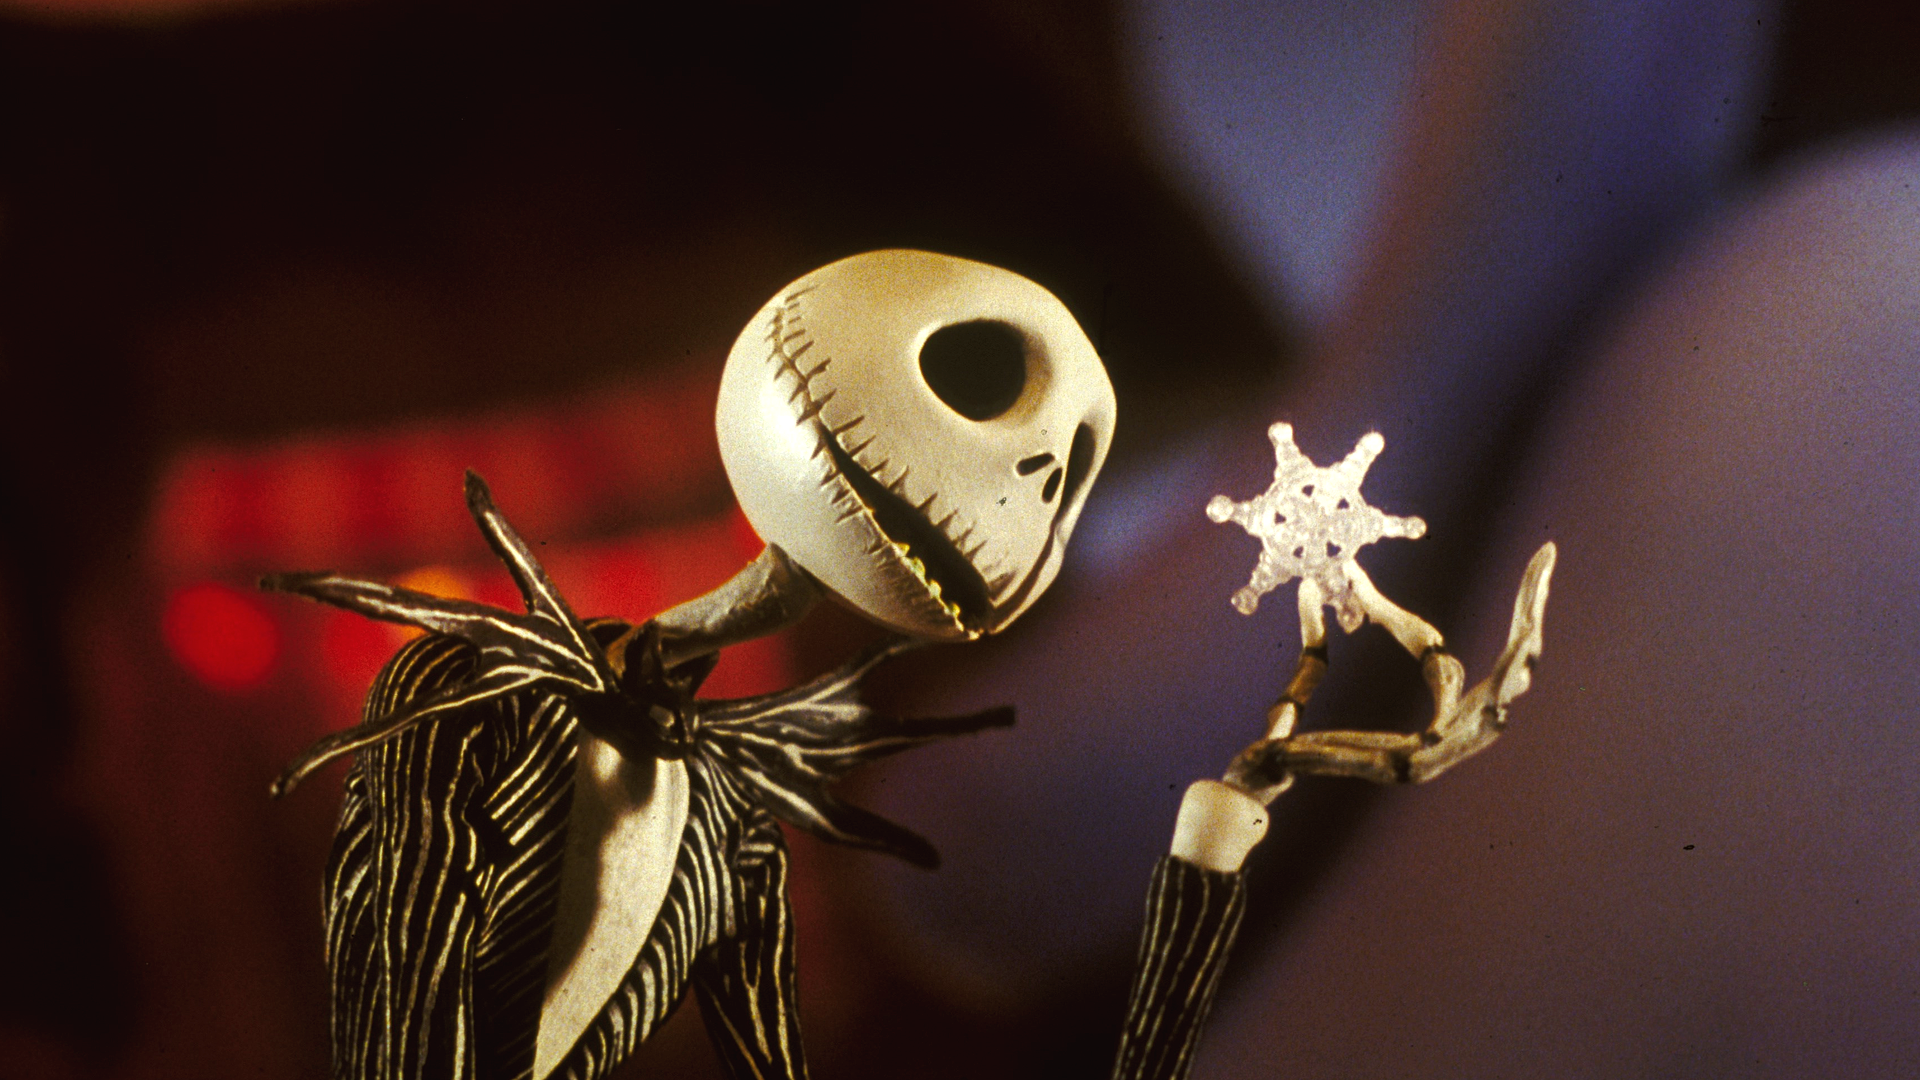 A scene from The Nightmare Before Christmas